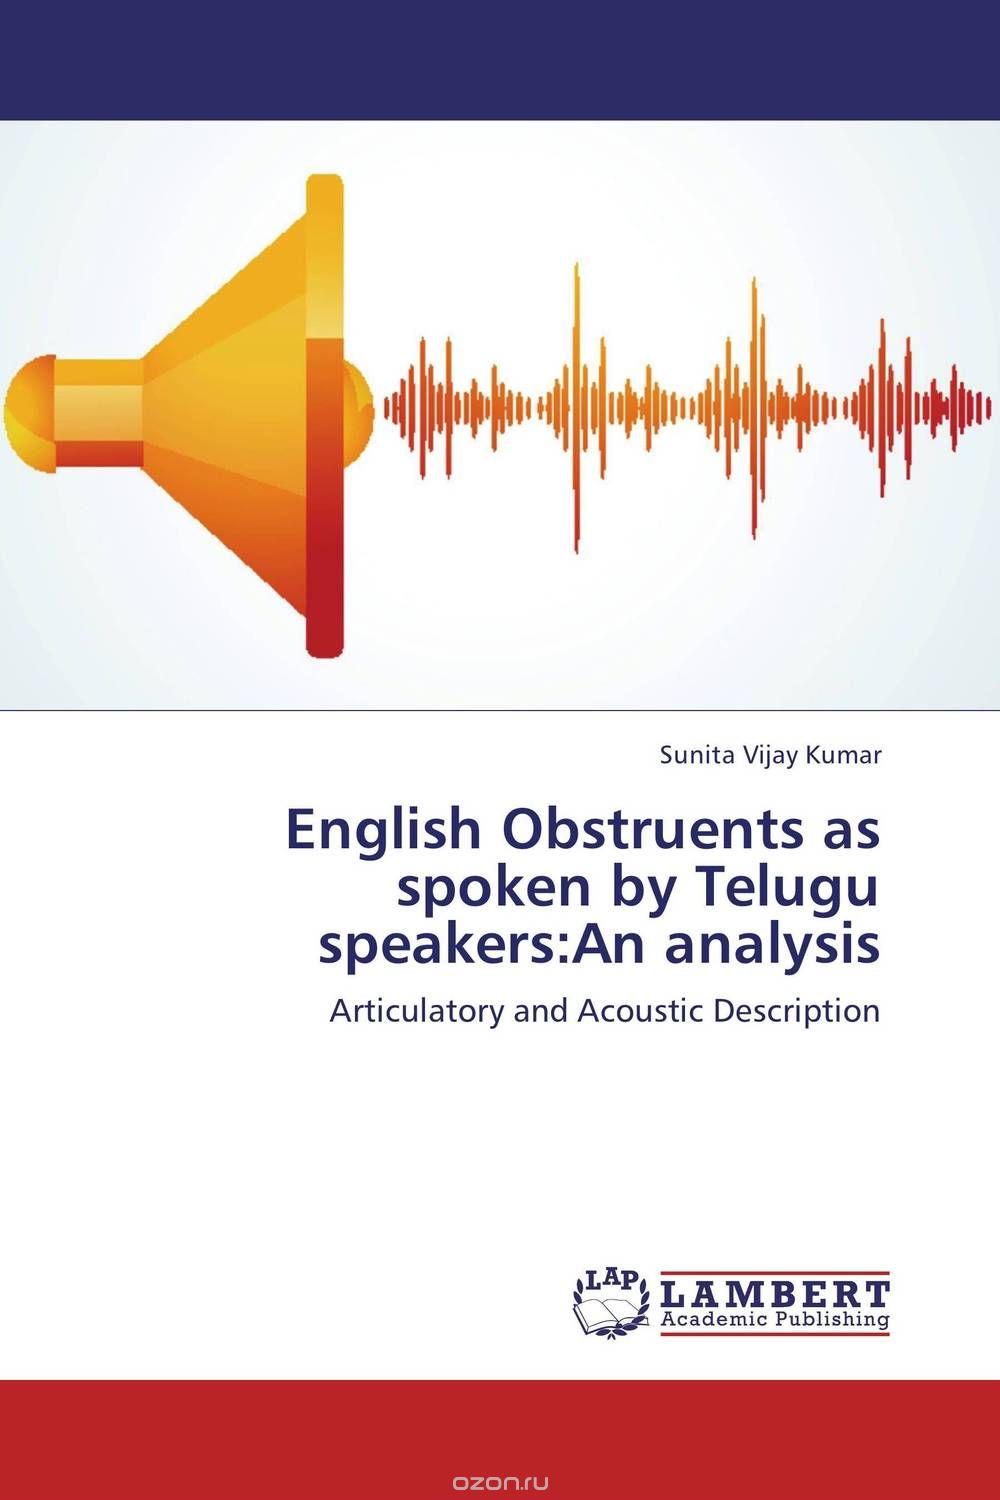 English Obstruents as spoken by Telugu speakers:An analysis